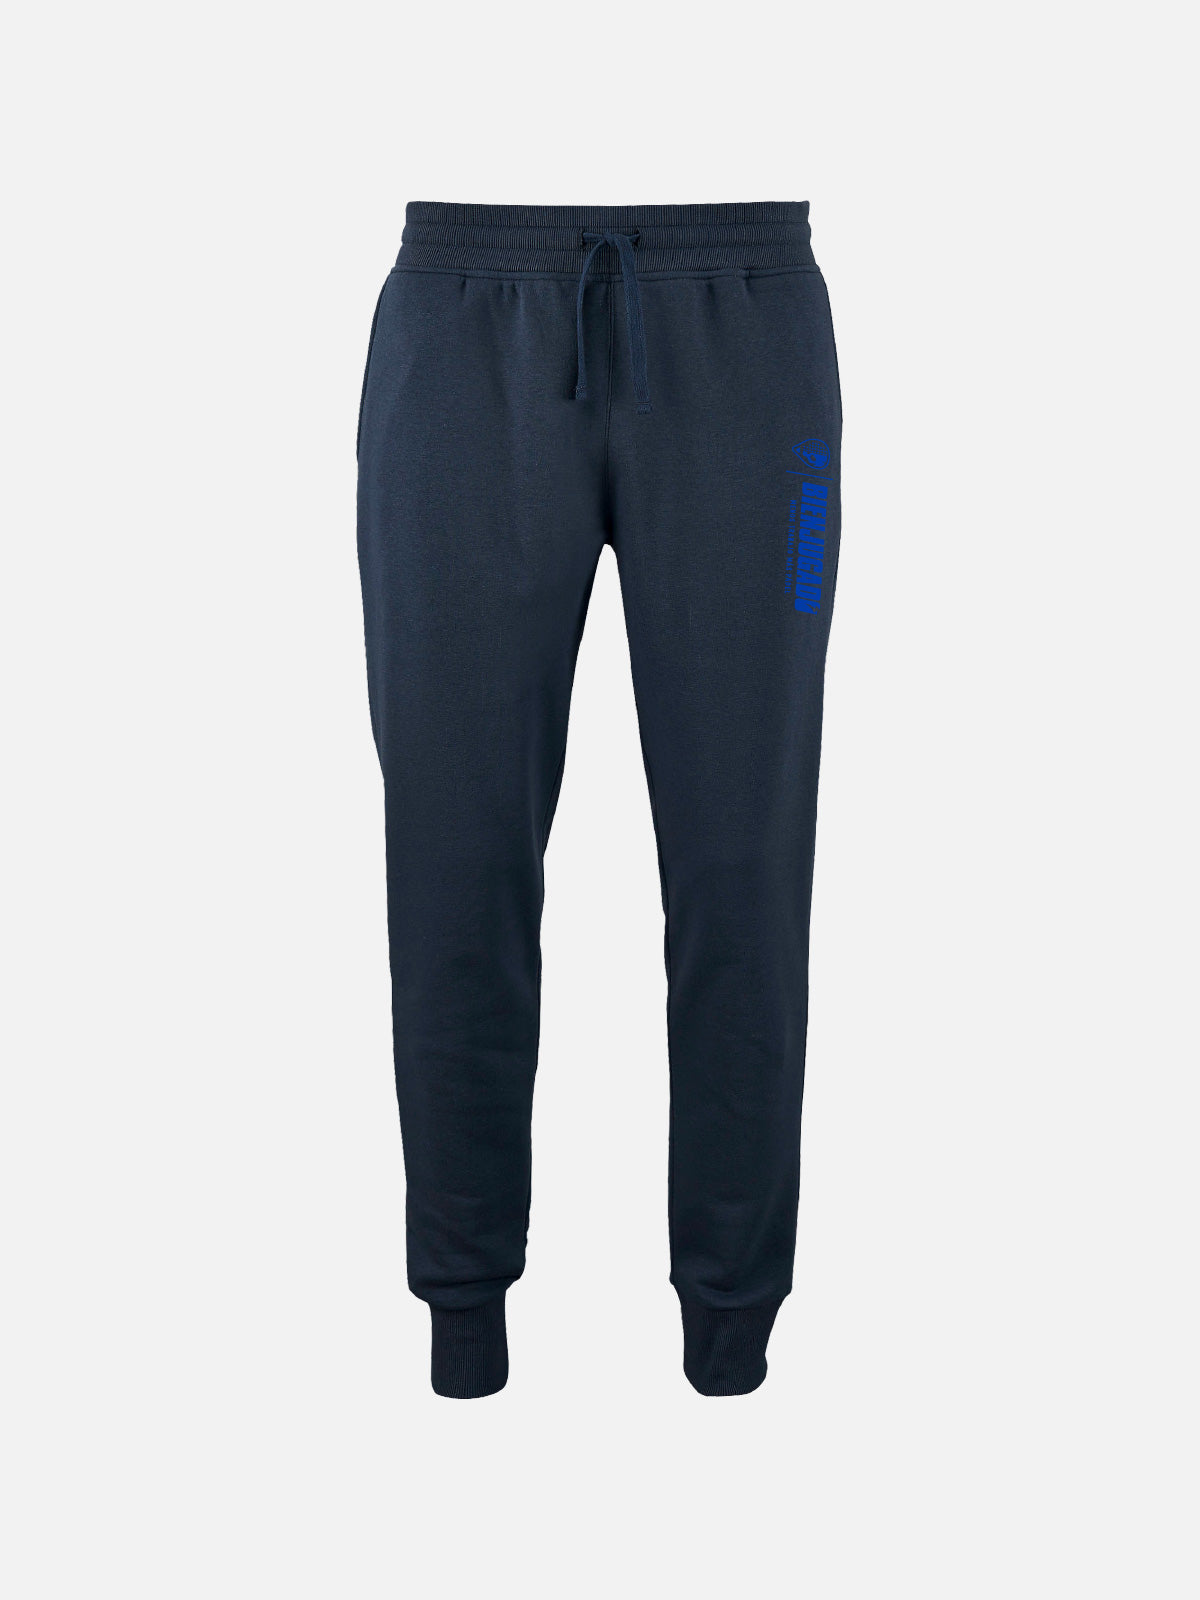 Iconic Women'S Trousers - Navy